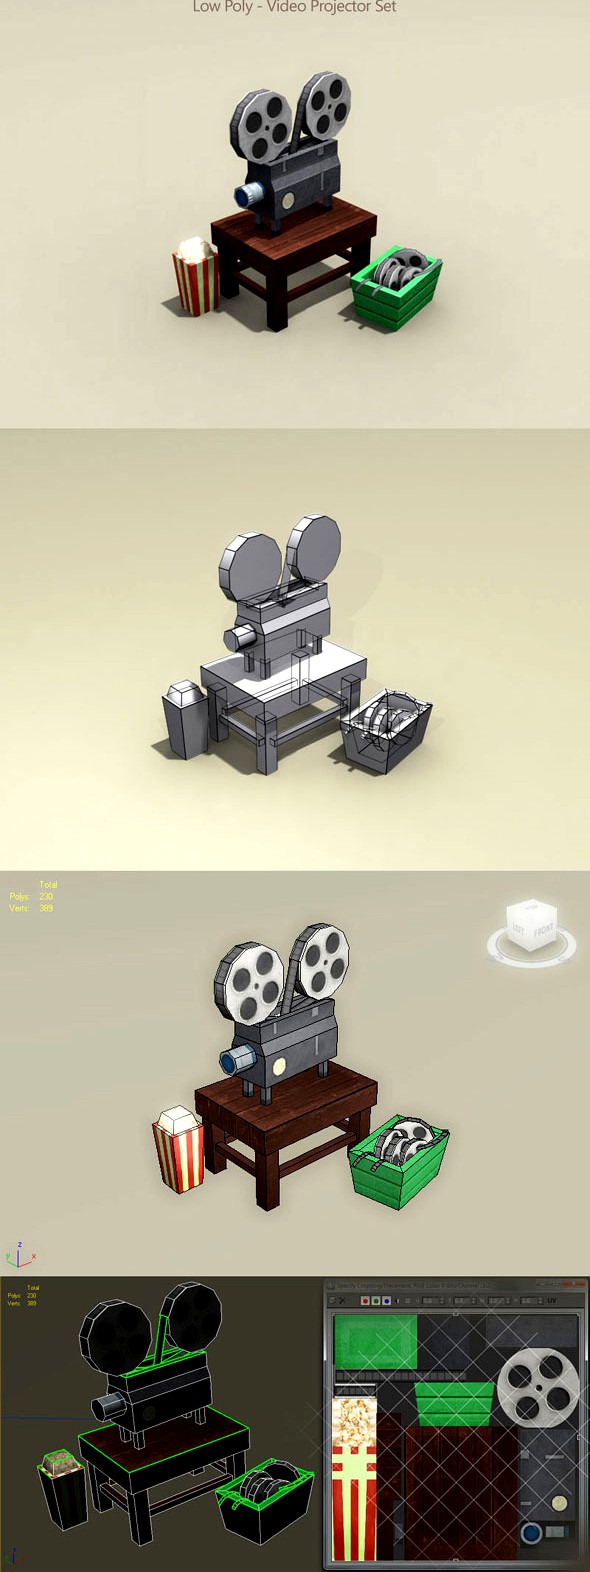 Low Poly Video Projector Set